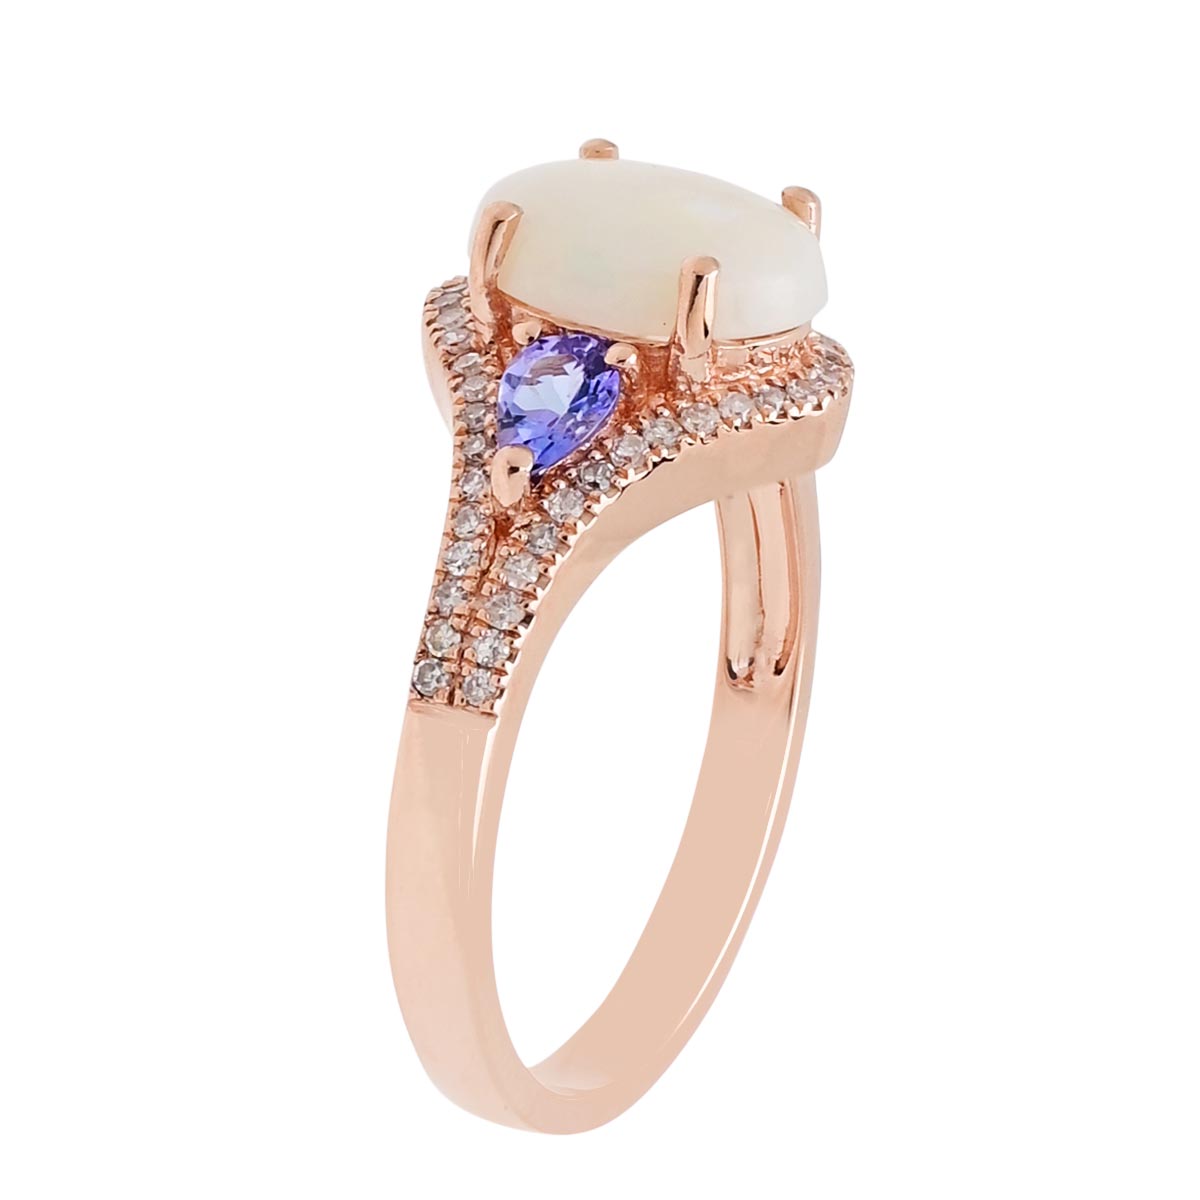 Oval Opal and Tanzanite Ring in 14kt Rose Gold with Diamonds (1/4ct tw)